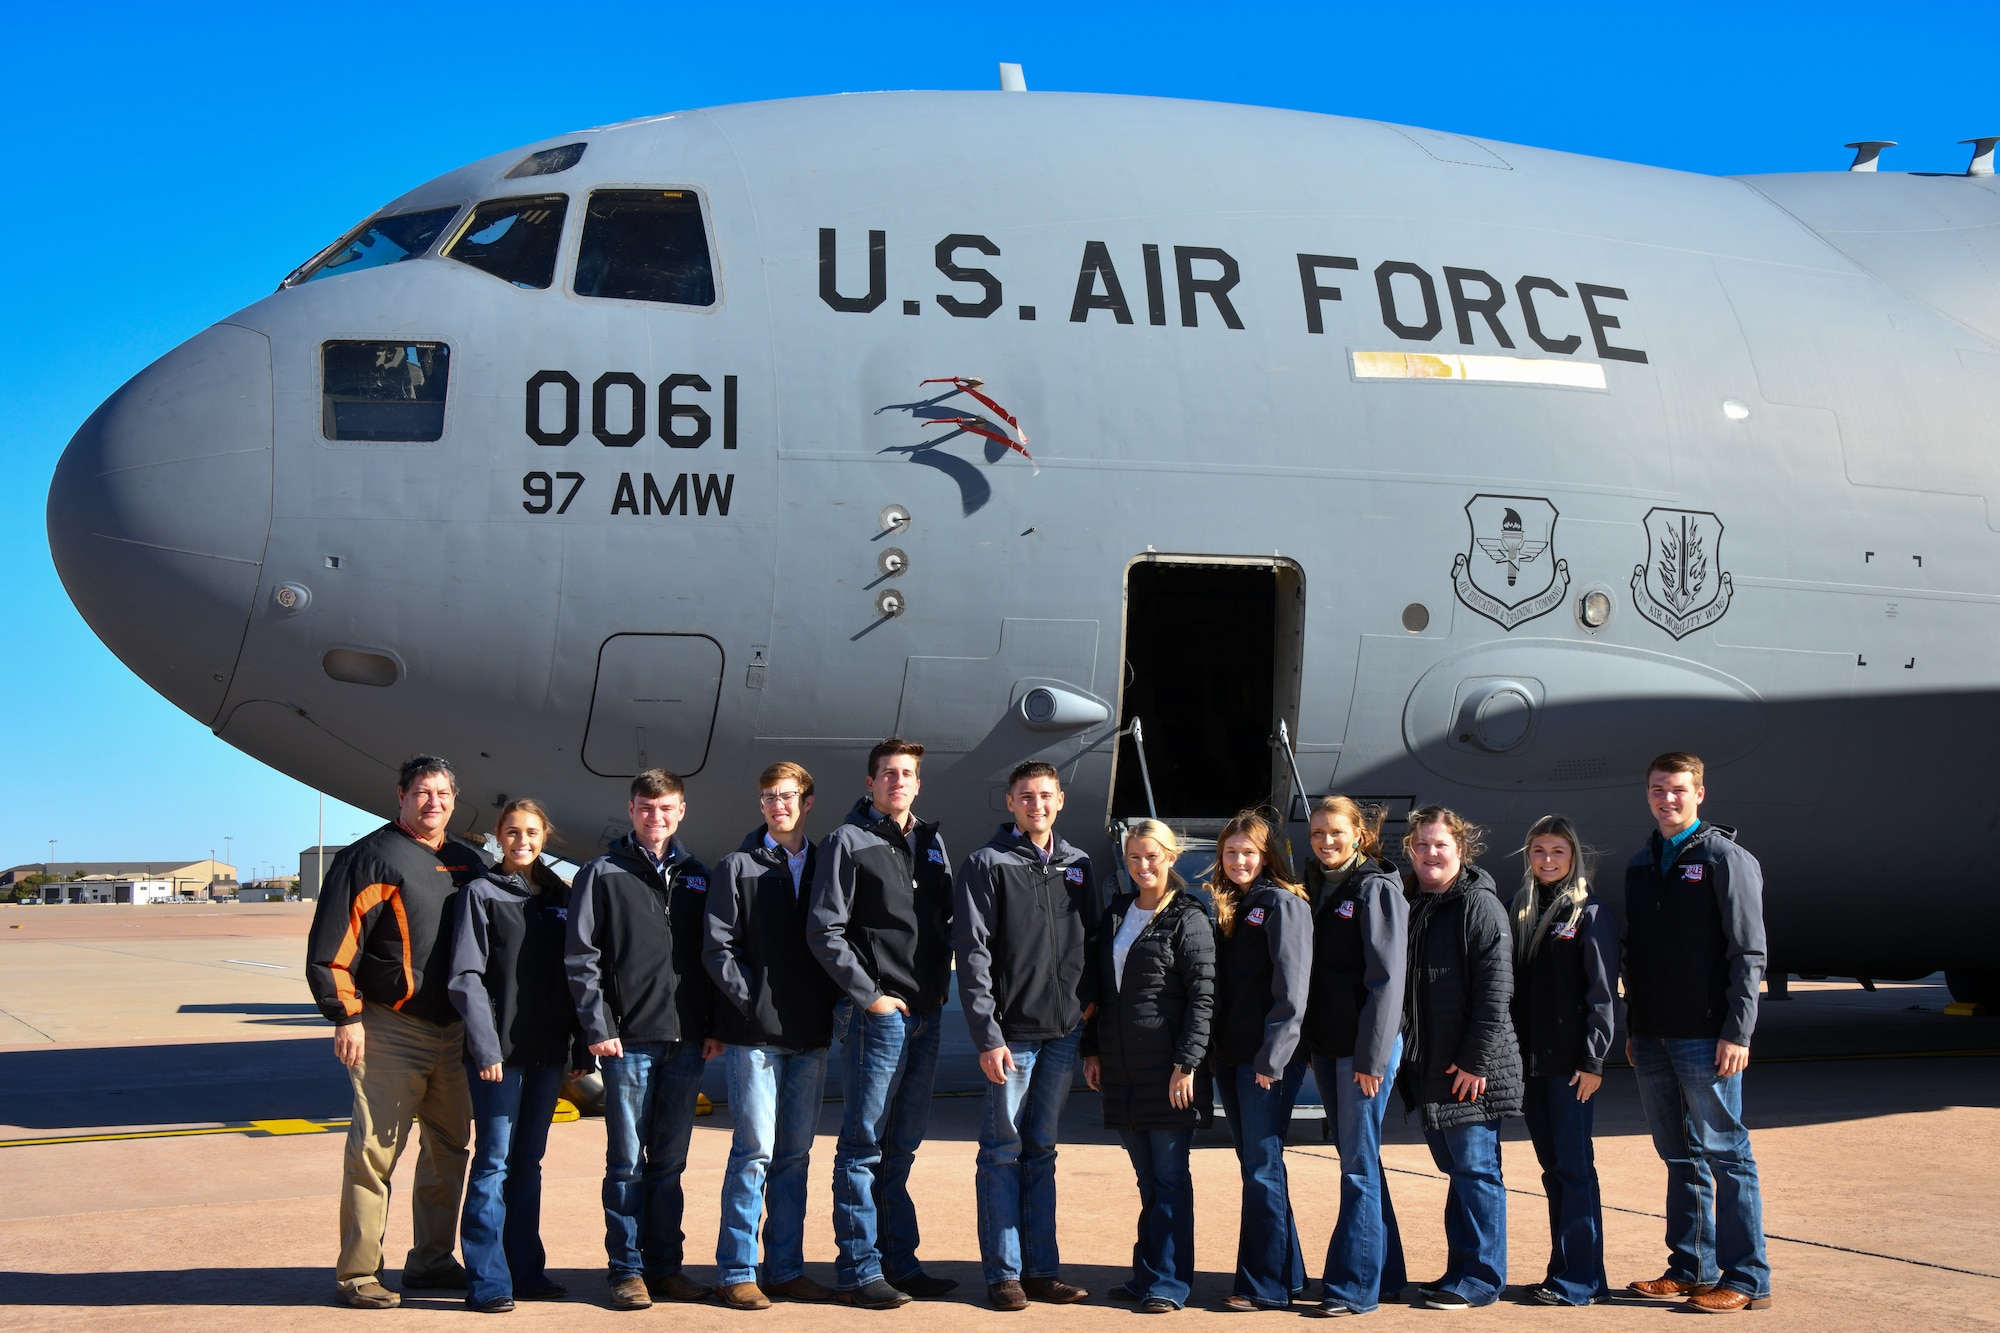 Students from Oklahoma State University’s Agricultural Leadership Experience pose for a photo in front of a C-17 Globemaster III at Altus Air Force Base (AAFB), Oklahoma, Oct. 25, 2022. For most of the students, the tour of AAFB was the first time they had ever been on an Air Force base. (U.S. Air Force photo by Airman 1st Class Kari Degraffenreed)